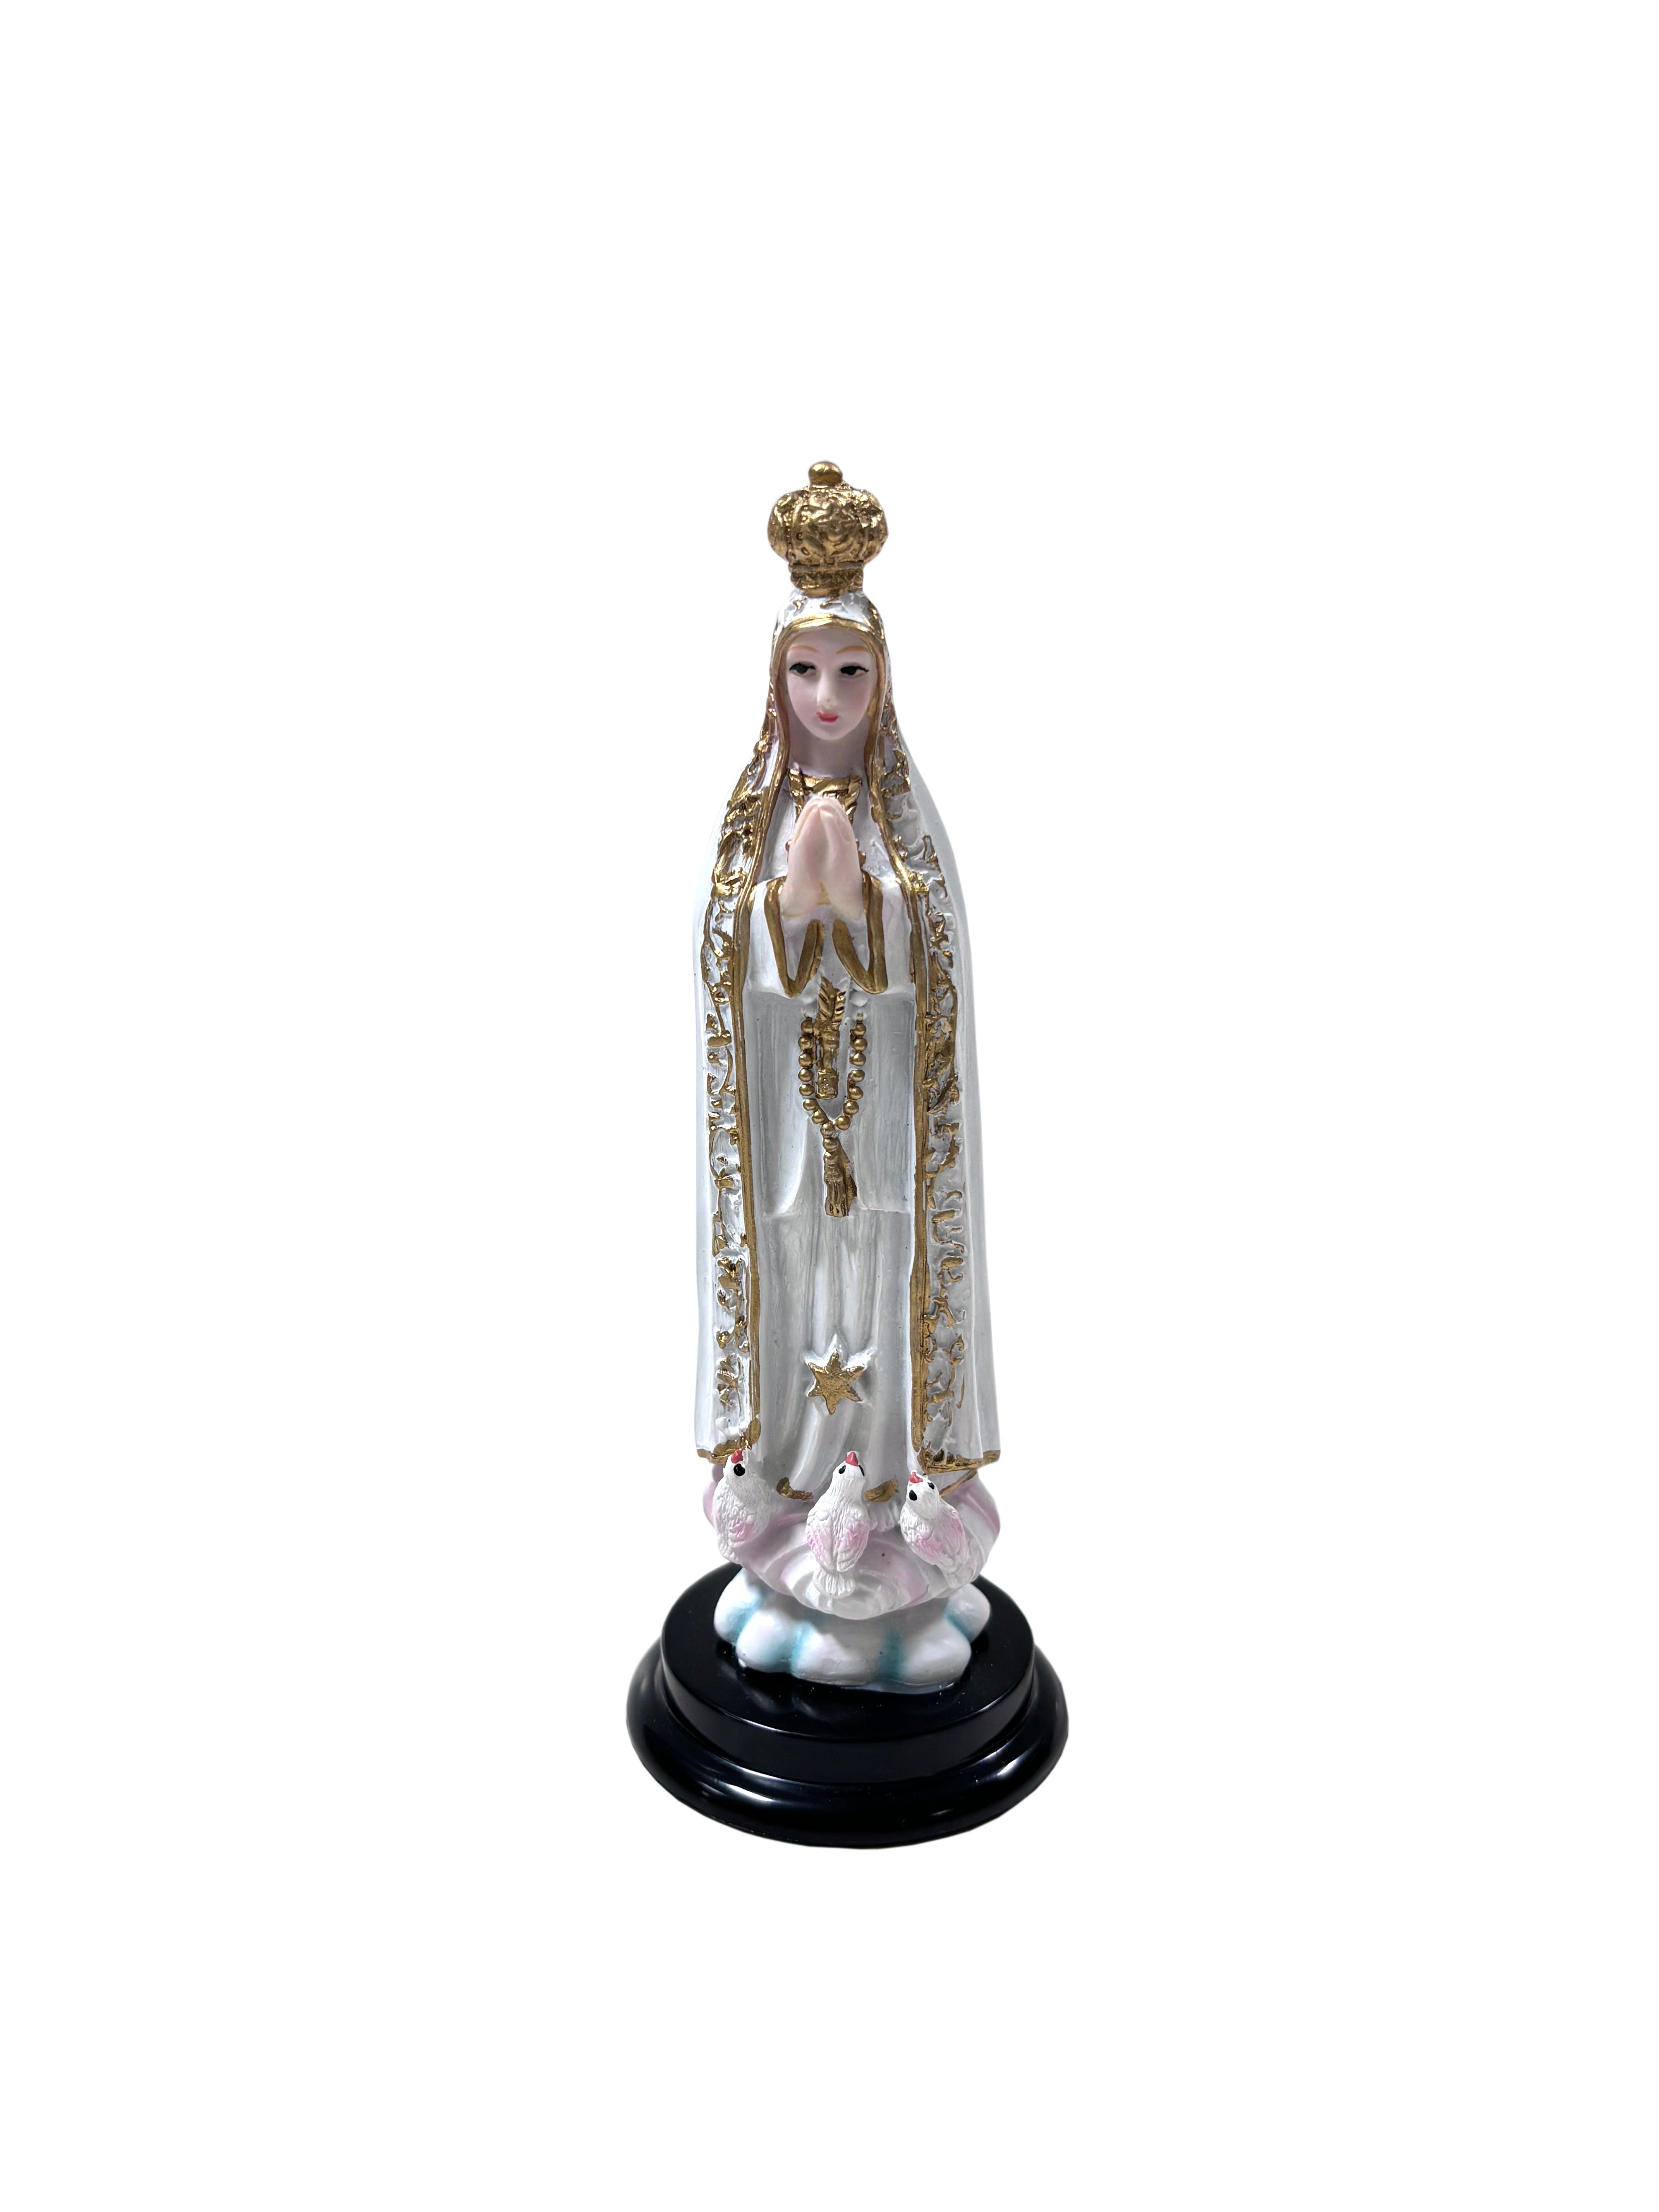 Religious statue of Our Lady of Fatima 5" height